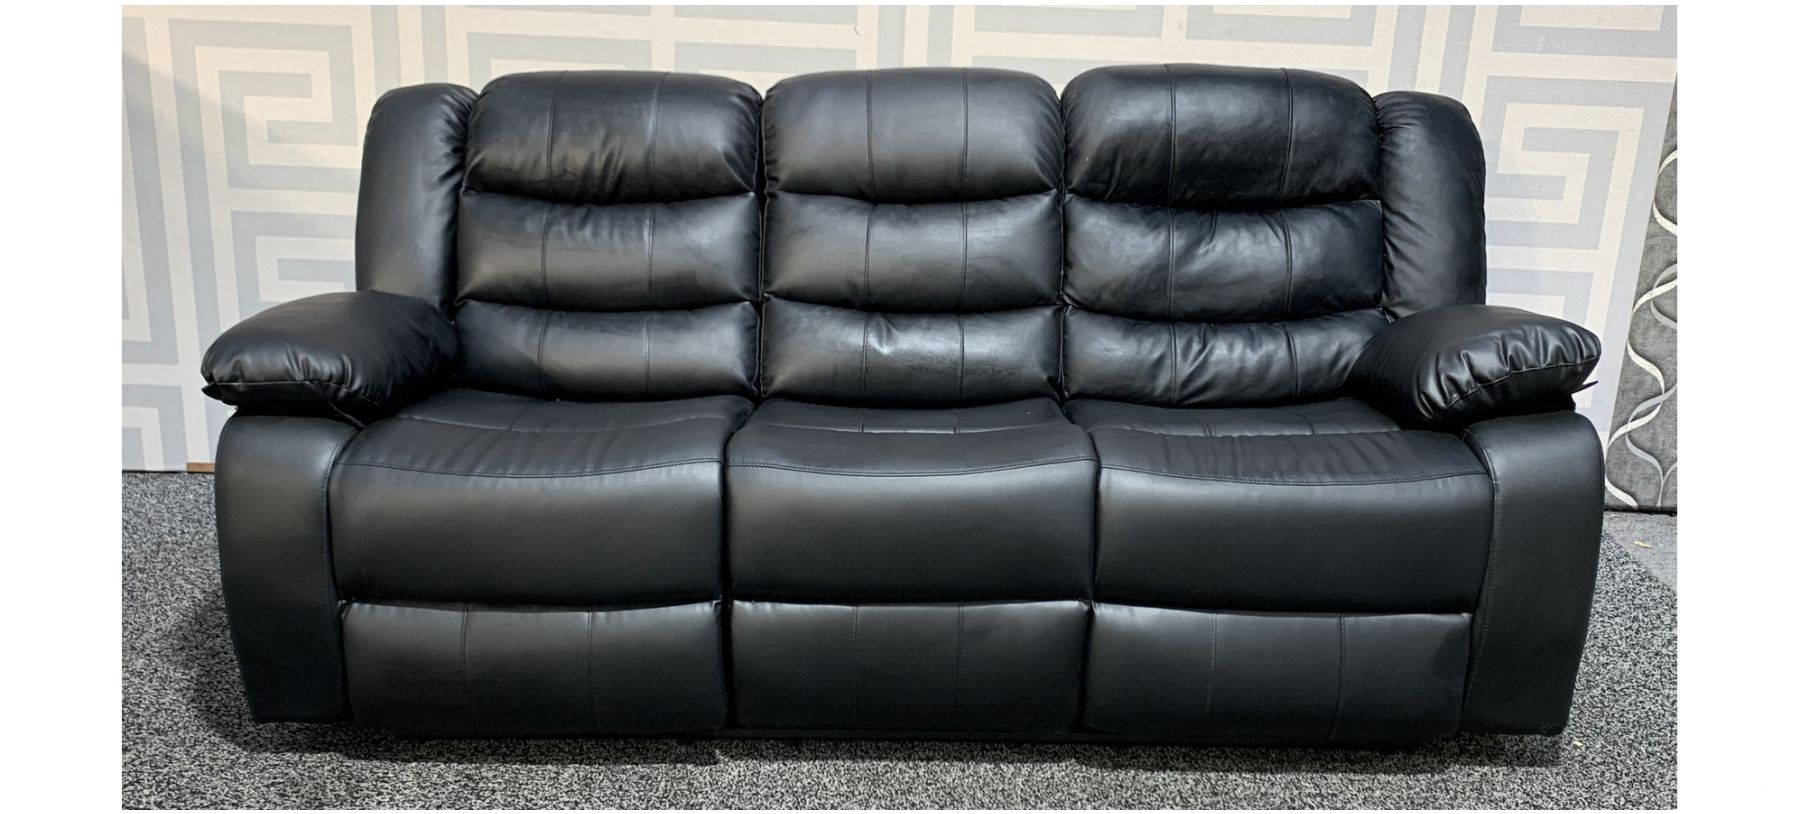 Roma Black Bonded Leather Large Sofa, Roma Leather Reclining Sofa Reviews Best Quality